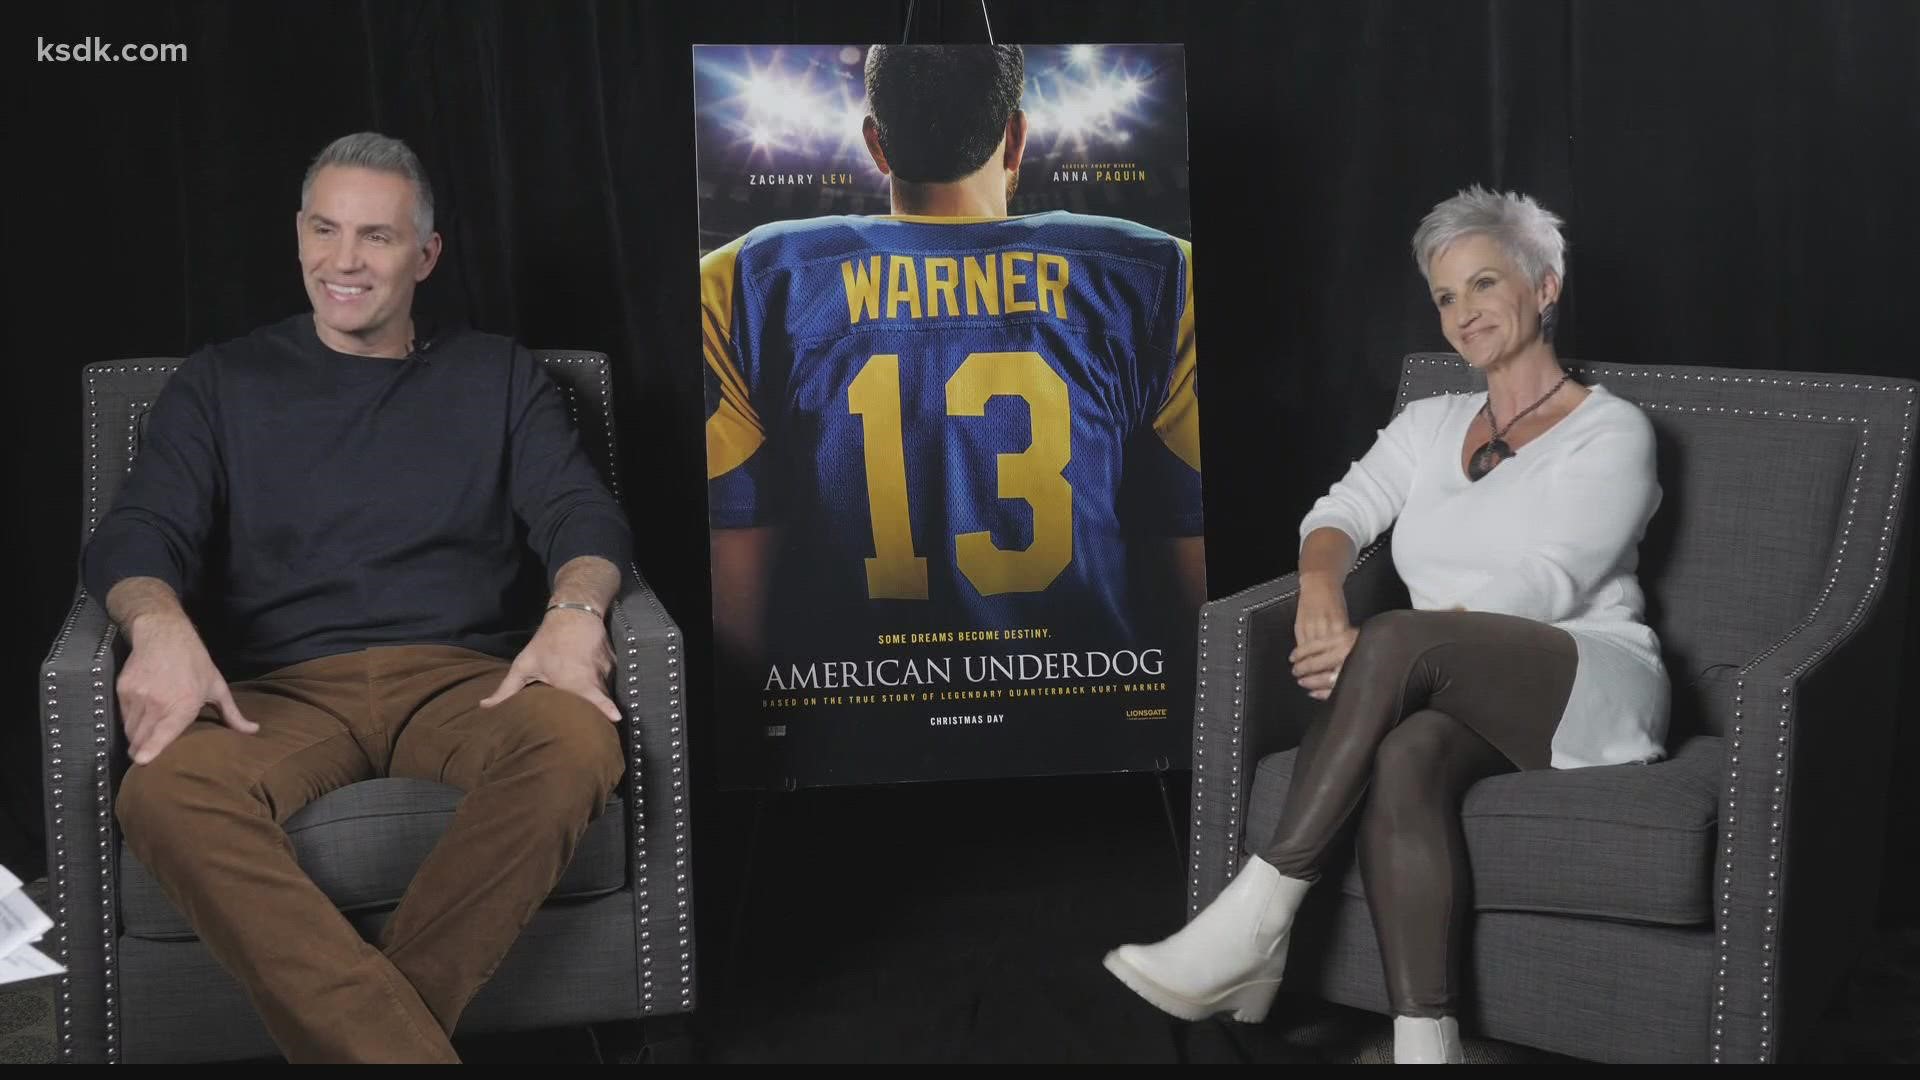 'American Underdog: The Kurt Warner Story' releases in December. Frank Cusumano sat down with Kurt and Brenda Warner to discuss the movie.